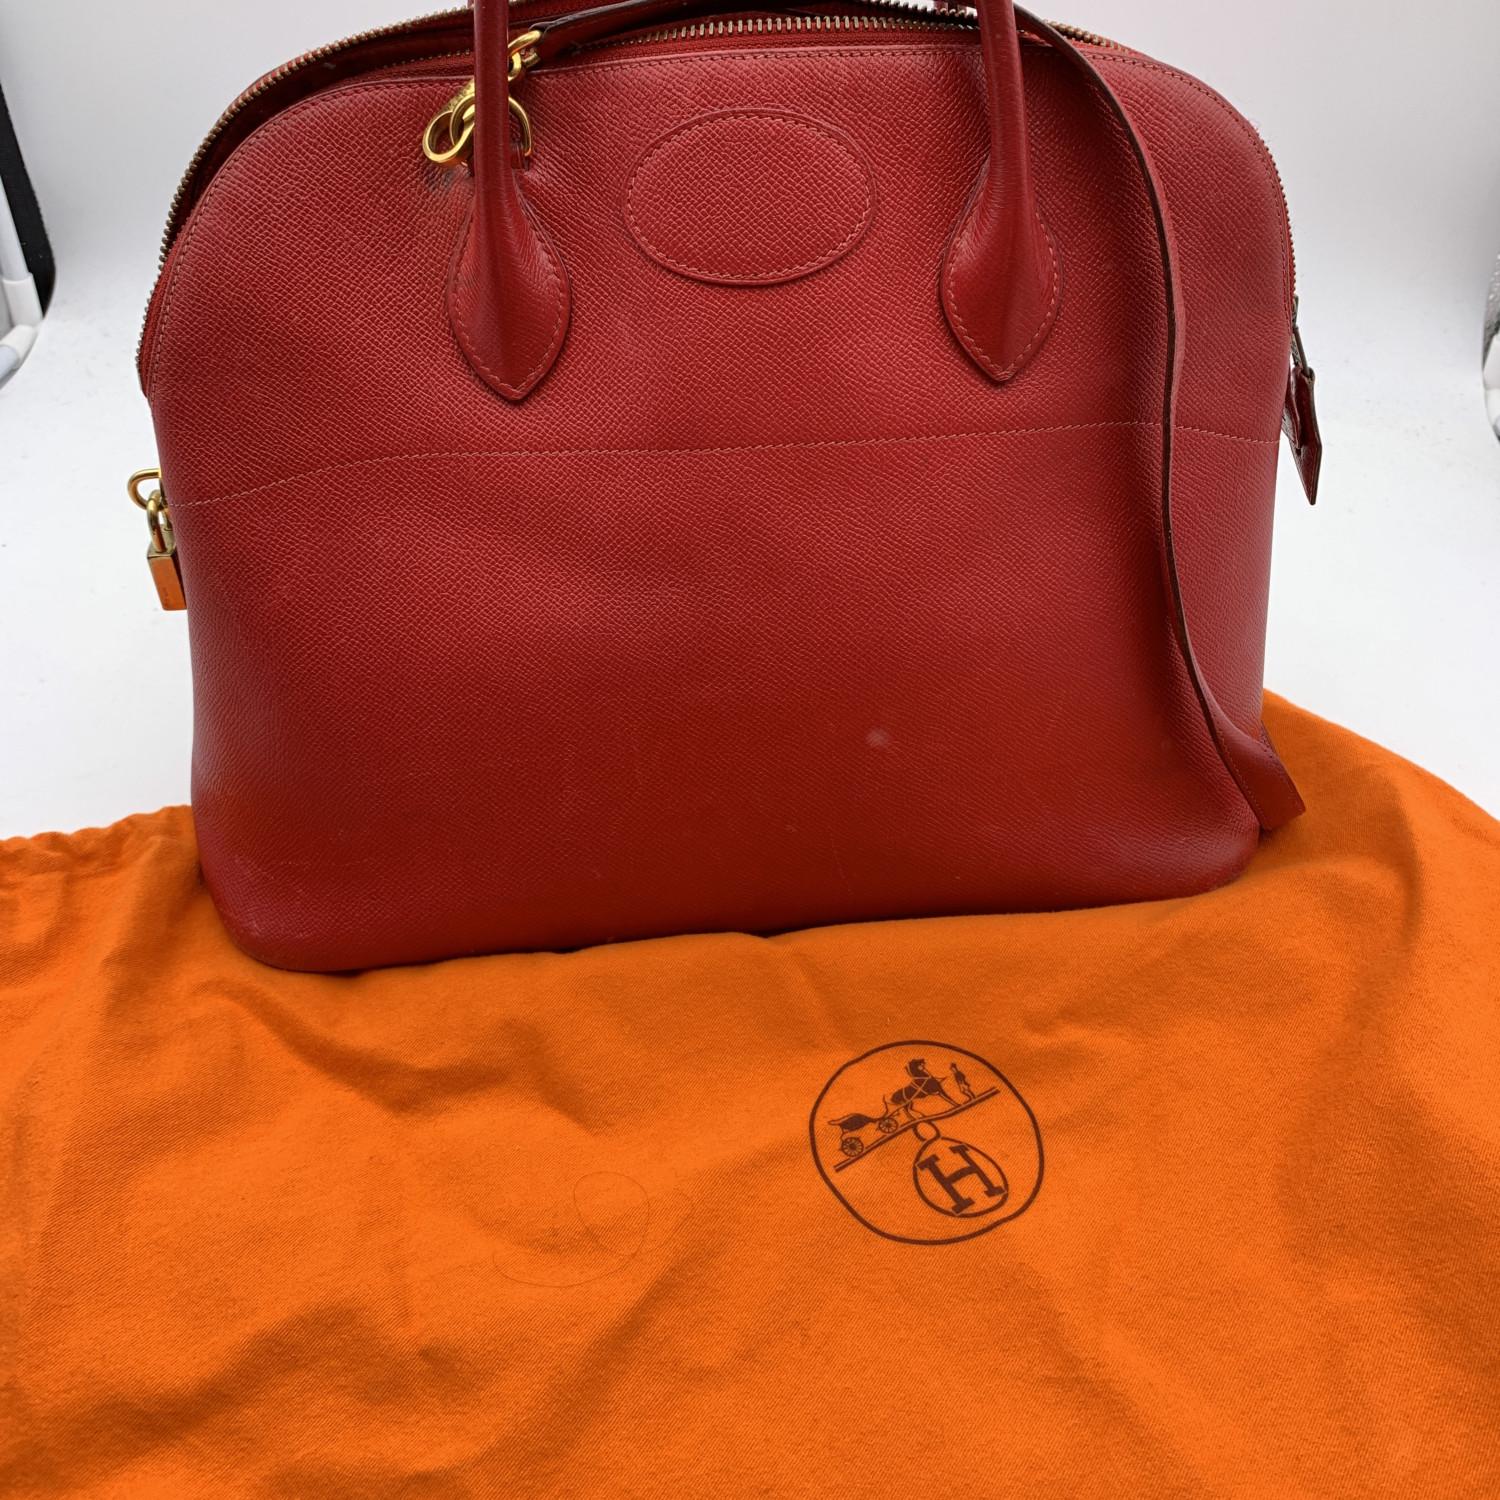 Women's Hermes Vintage 1992 Red Leather Bolide 35 Satchel Bag with Strap For Sale